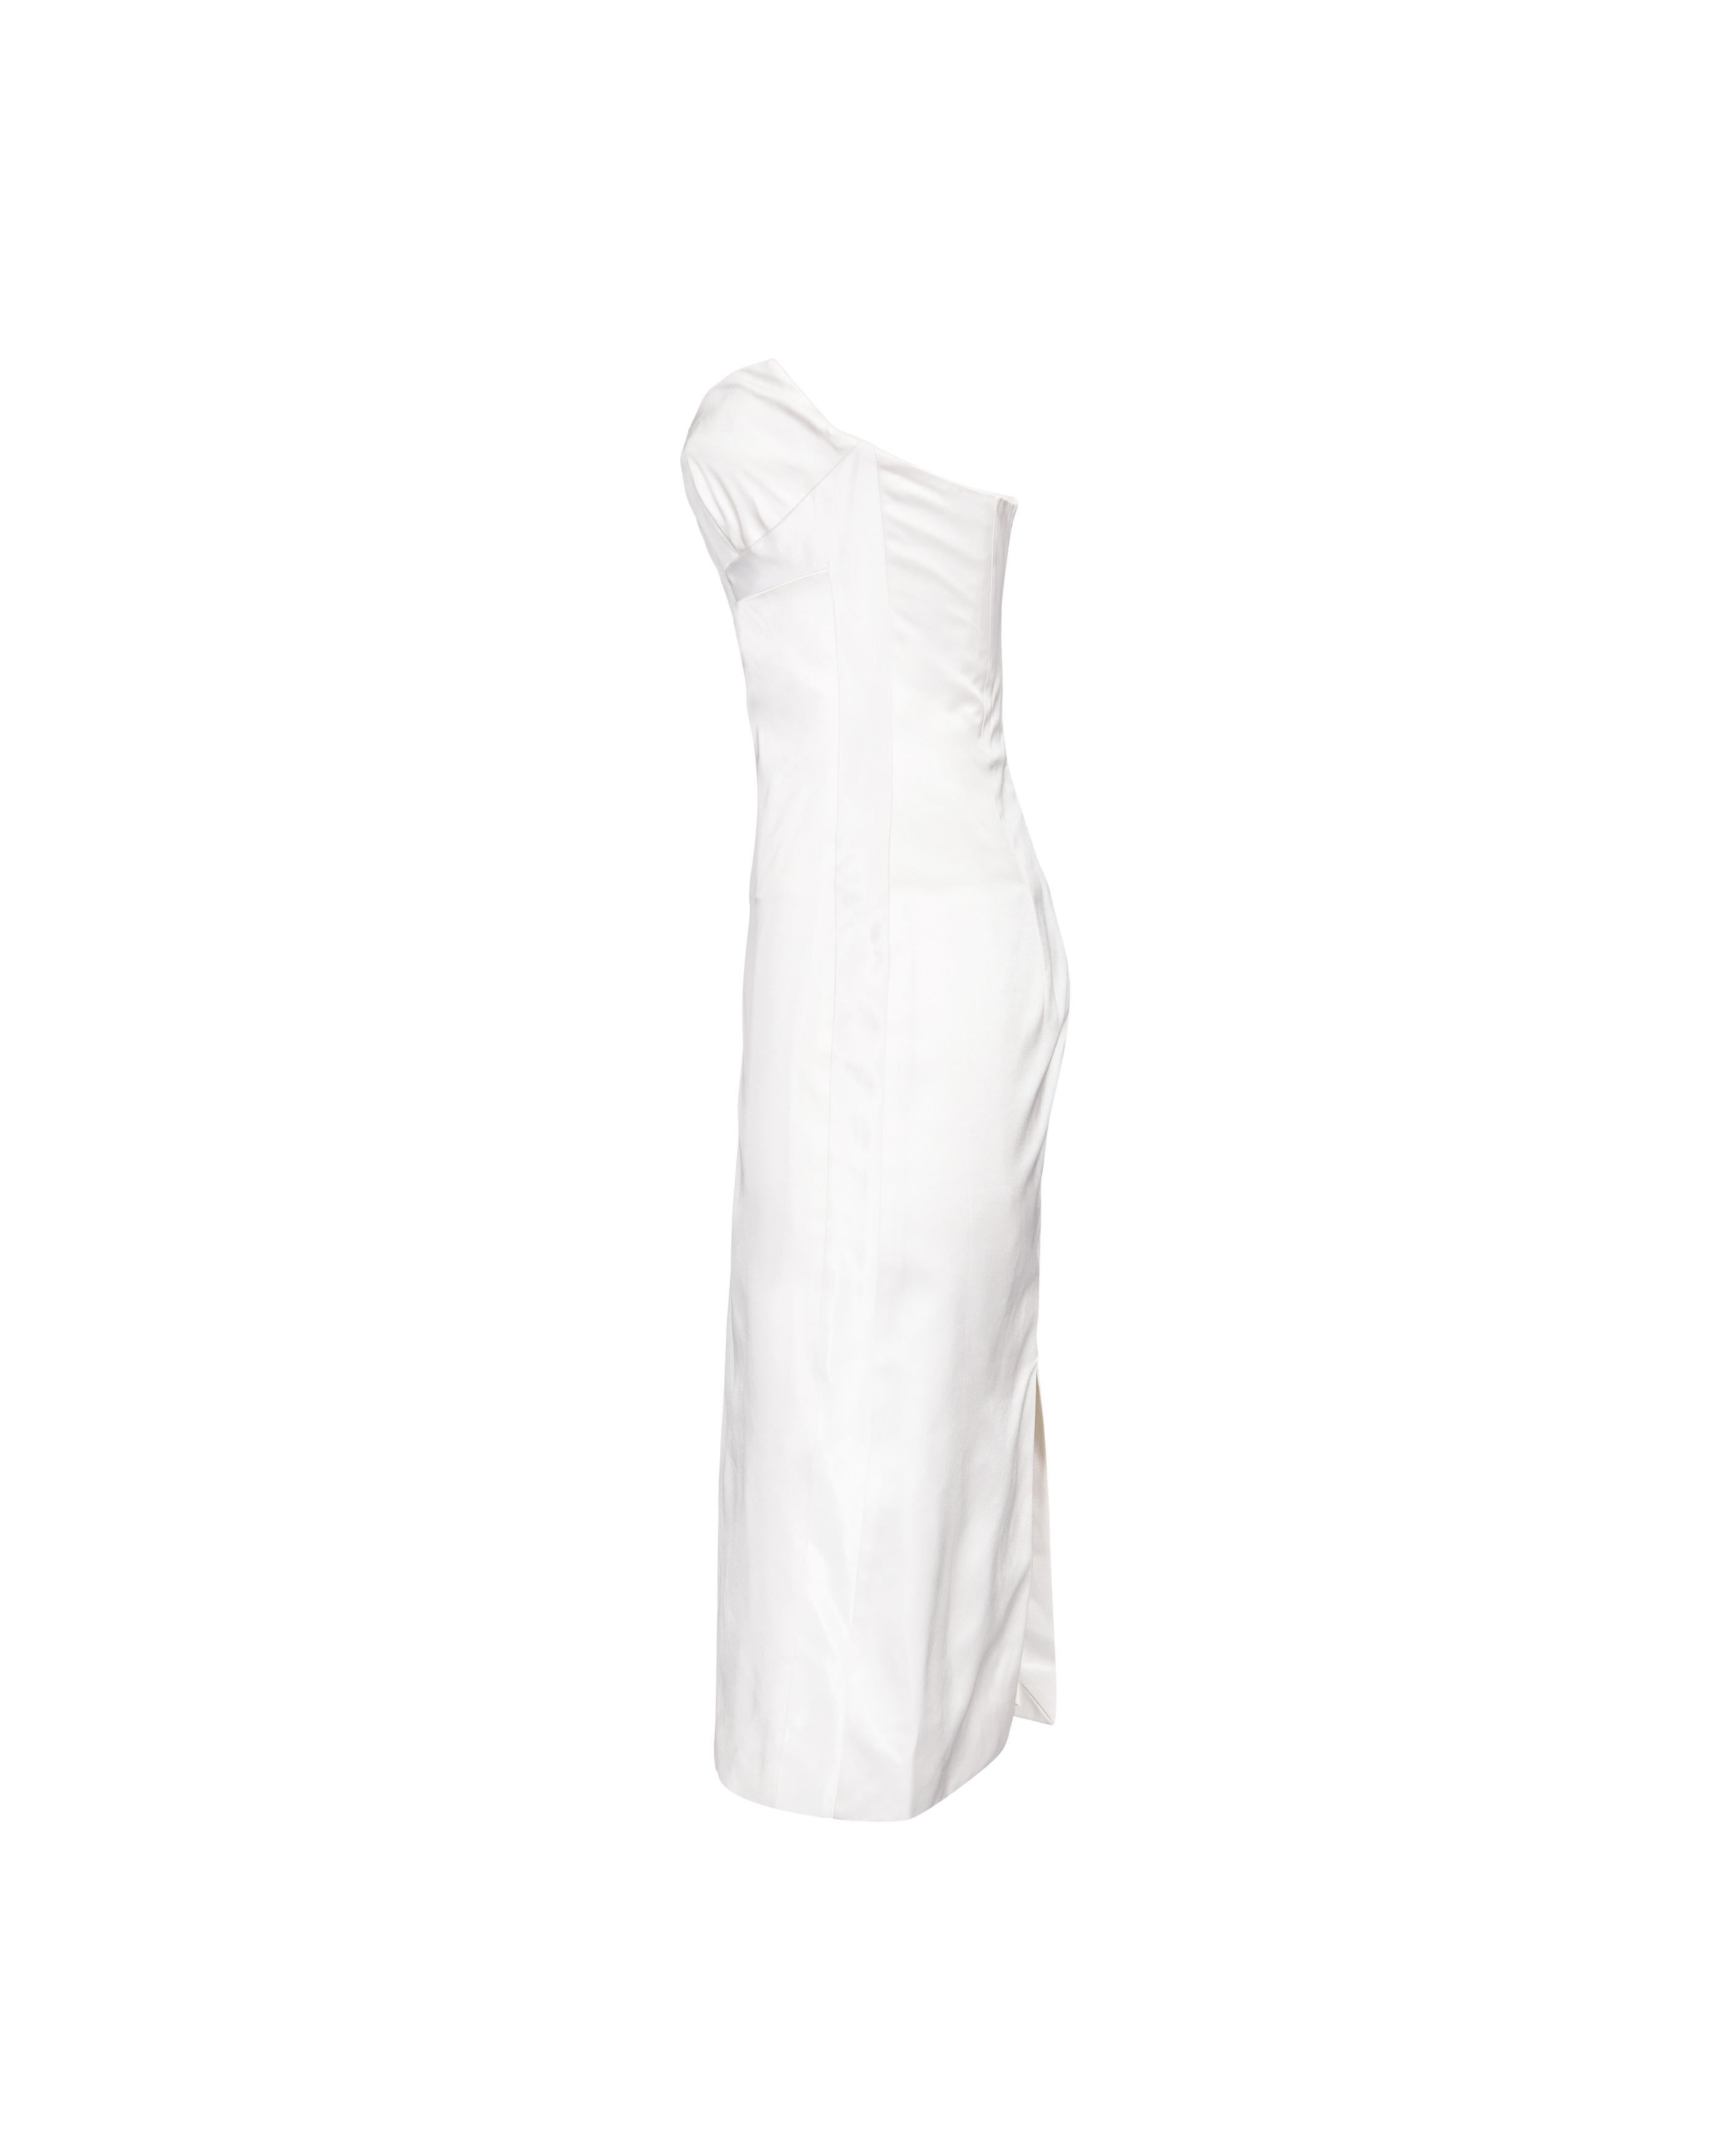 Women's S/S 2001 Gucci by Tom Ford White Silk Satin Strapless Corset Dress